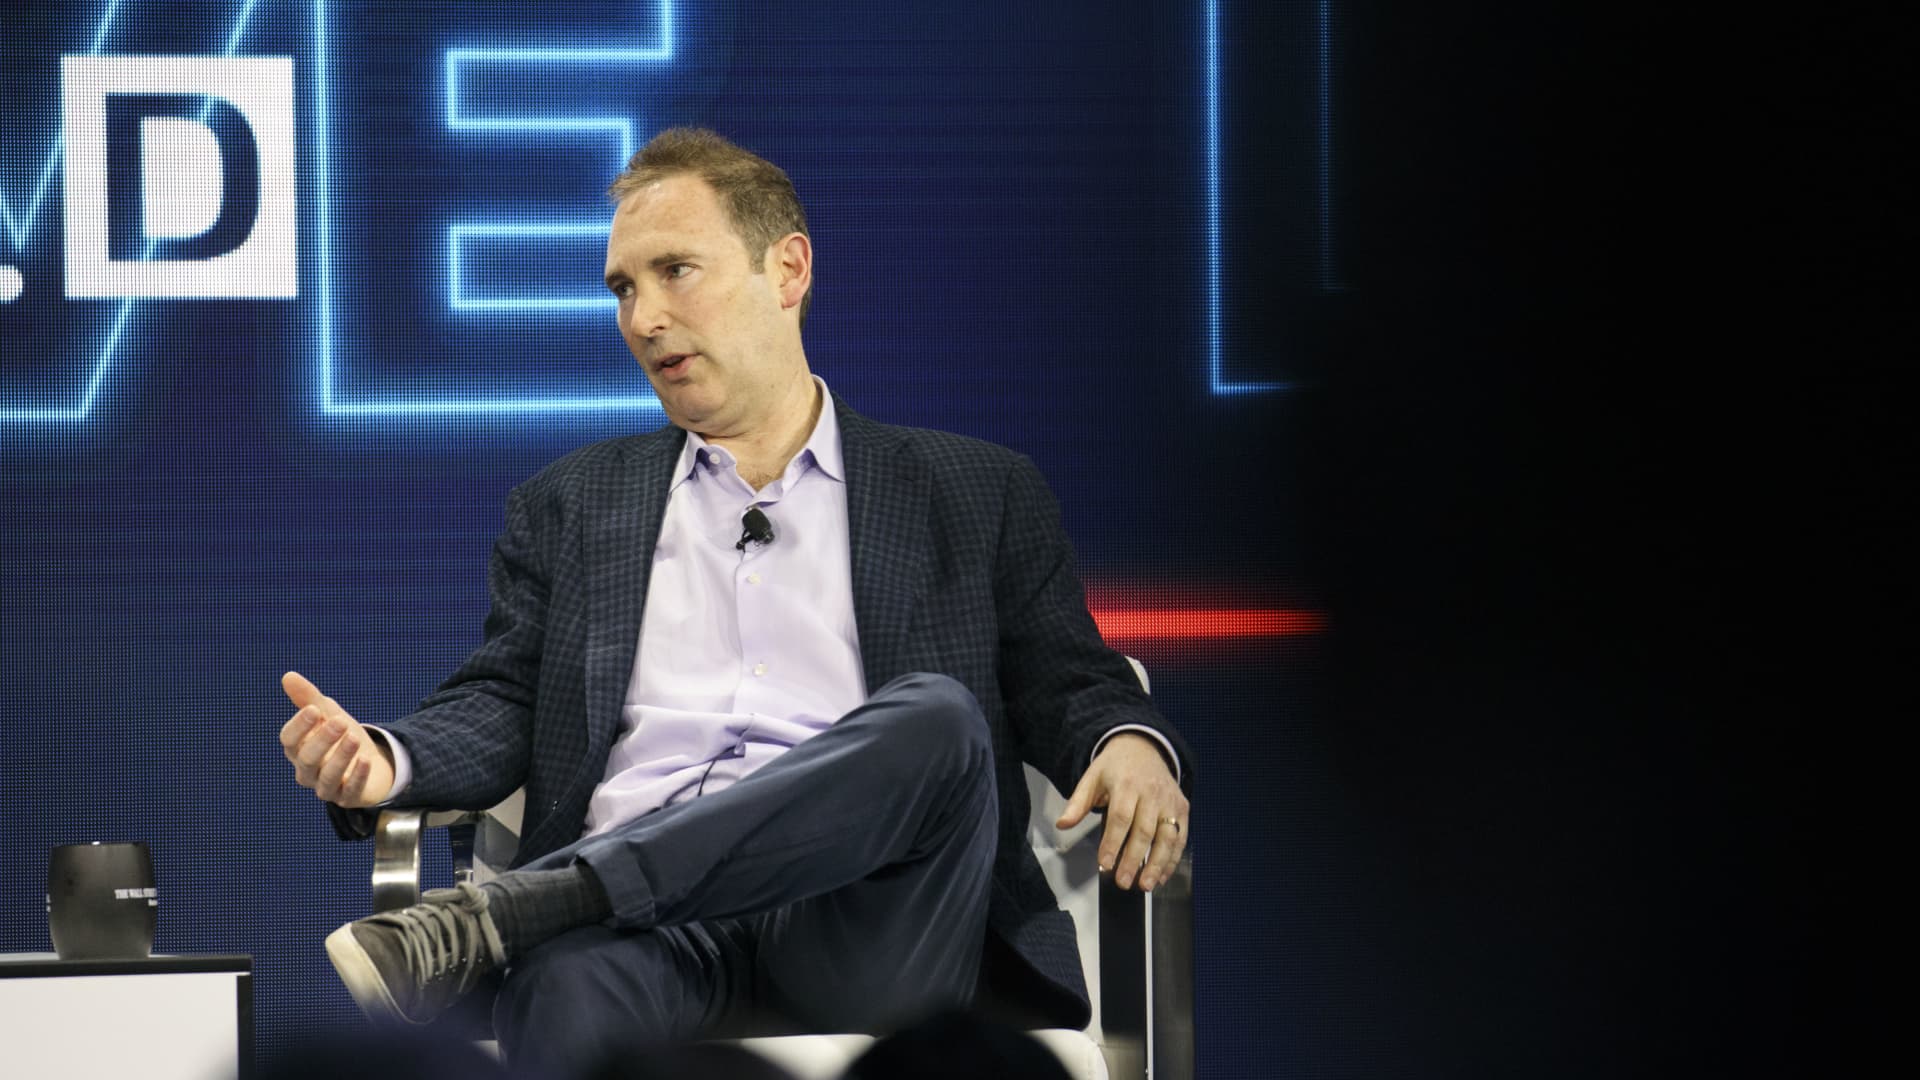 Andy Jassy, CEO of Amazon.com and then CEO of Amazon Web Services, speaks during the WSJDLive Global Technology Conference in Laguna Beach, California, U.S., speaks during the WSJDLive Global Technology Conference in Laguna Beach, California, on Oct. 25, 2016.